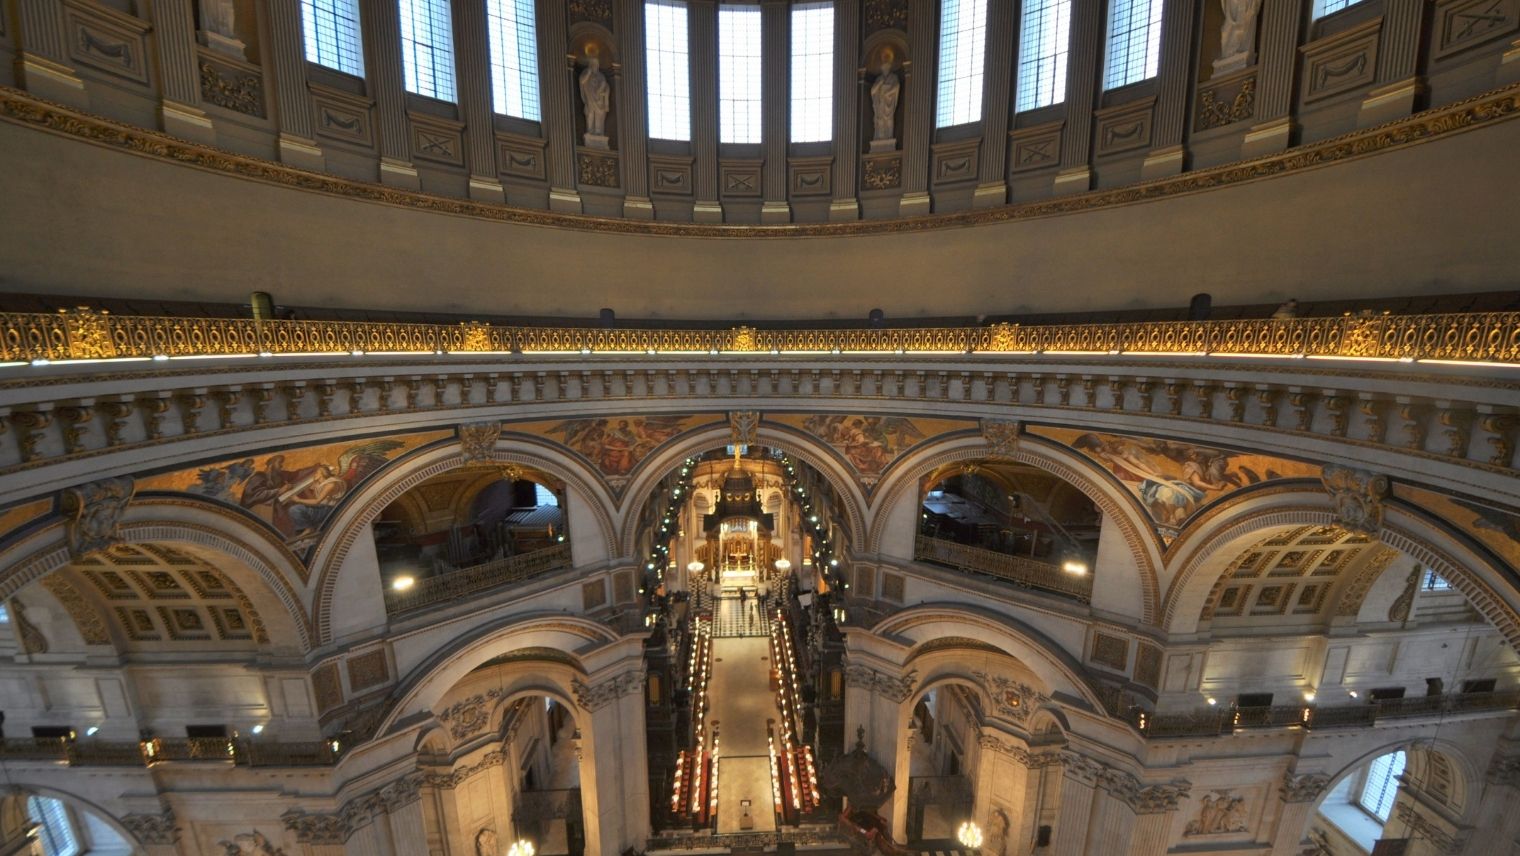 The Whispering Gallery at St Paul's Cathedral